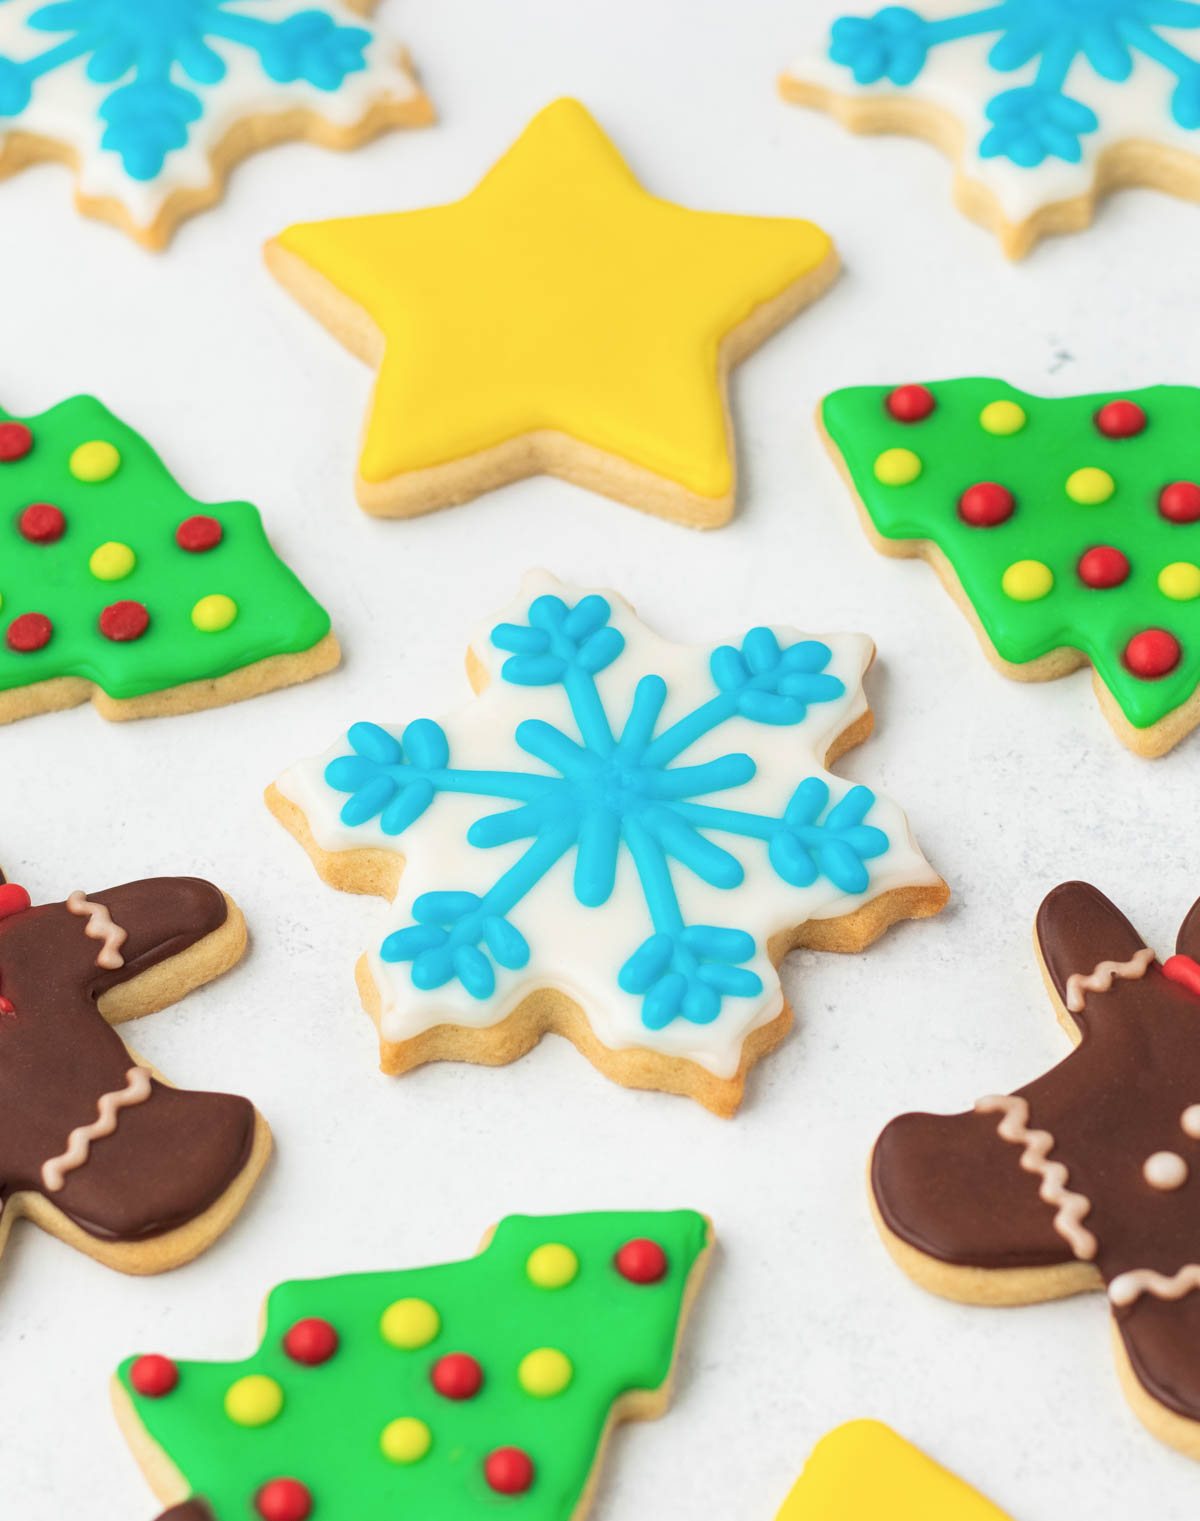 Christmas cookies decorated with gingerbread men, snowflakes, and stars.